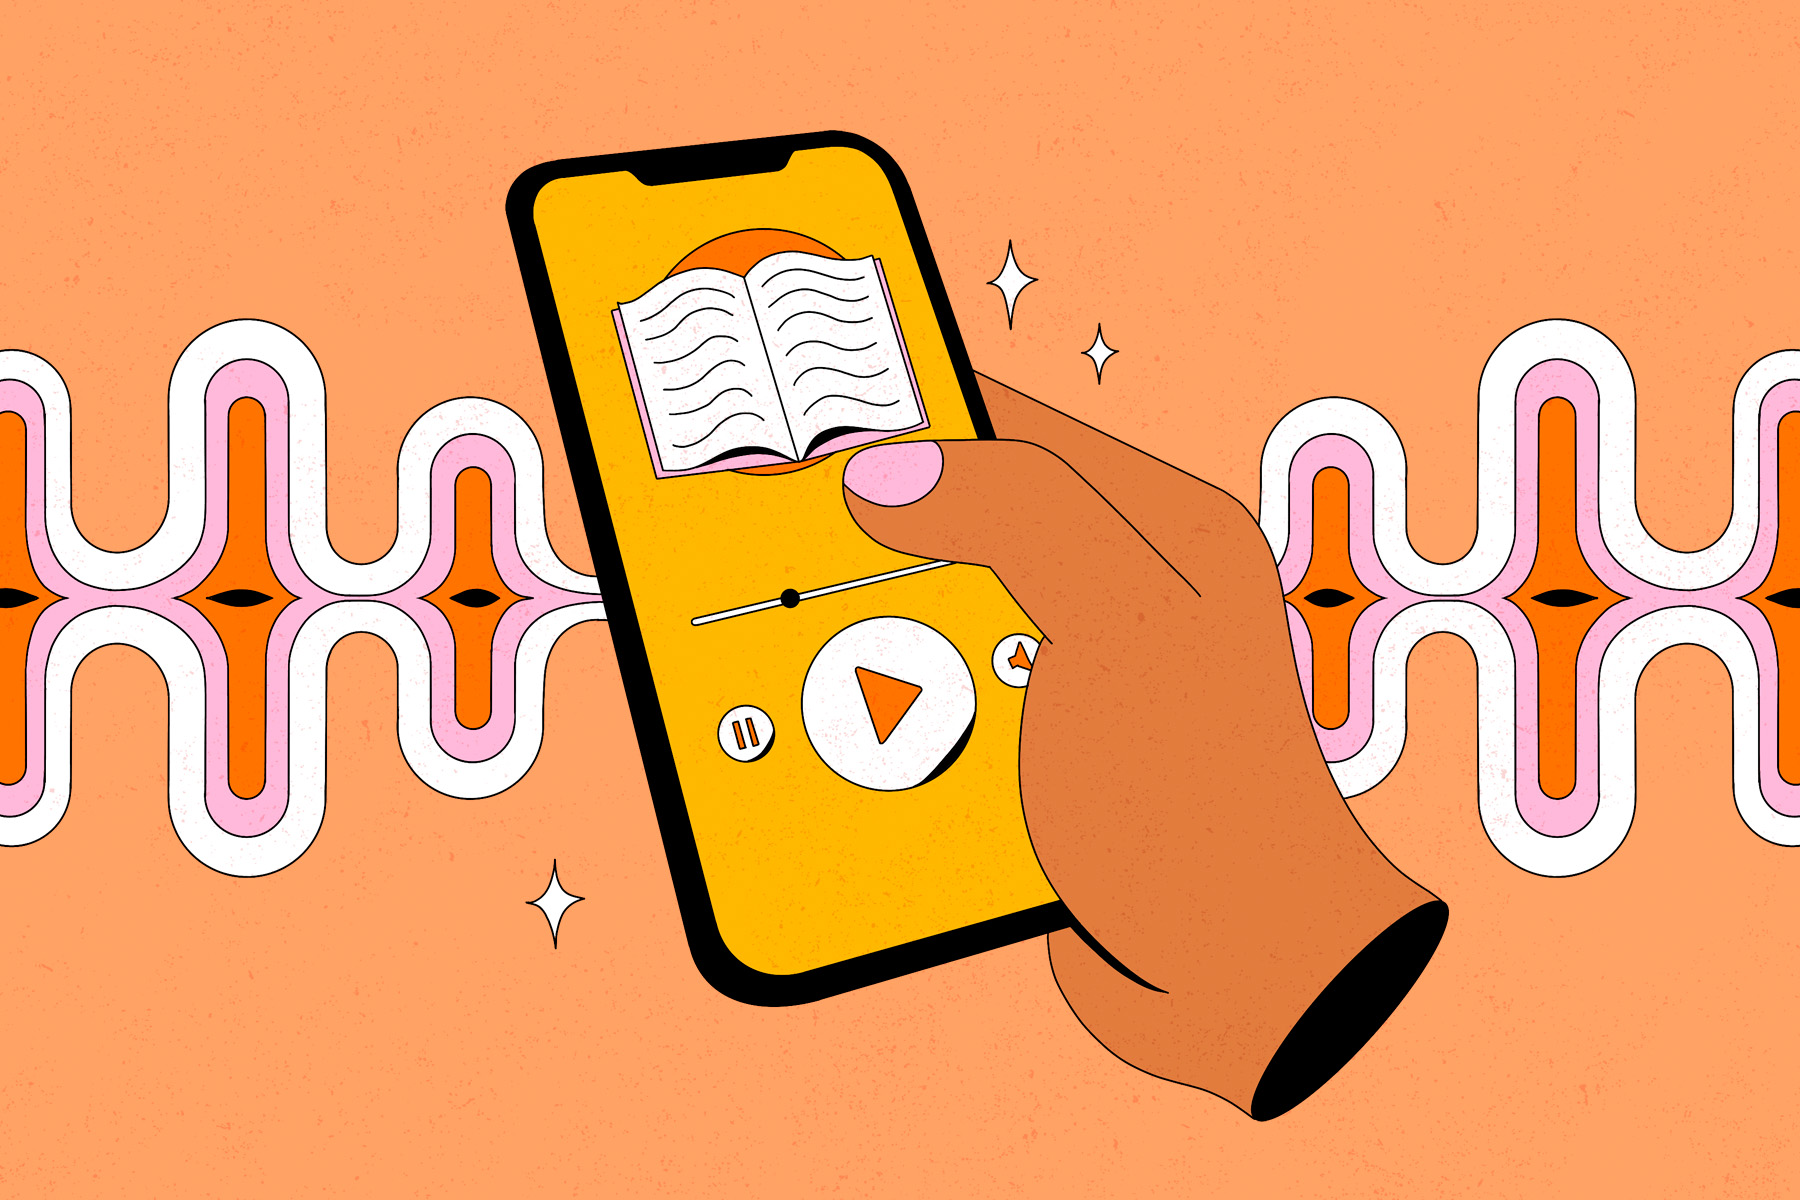 A colourful illustration of a disembodied hand holding a phone on which an audiobook is playing.